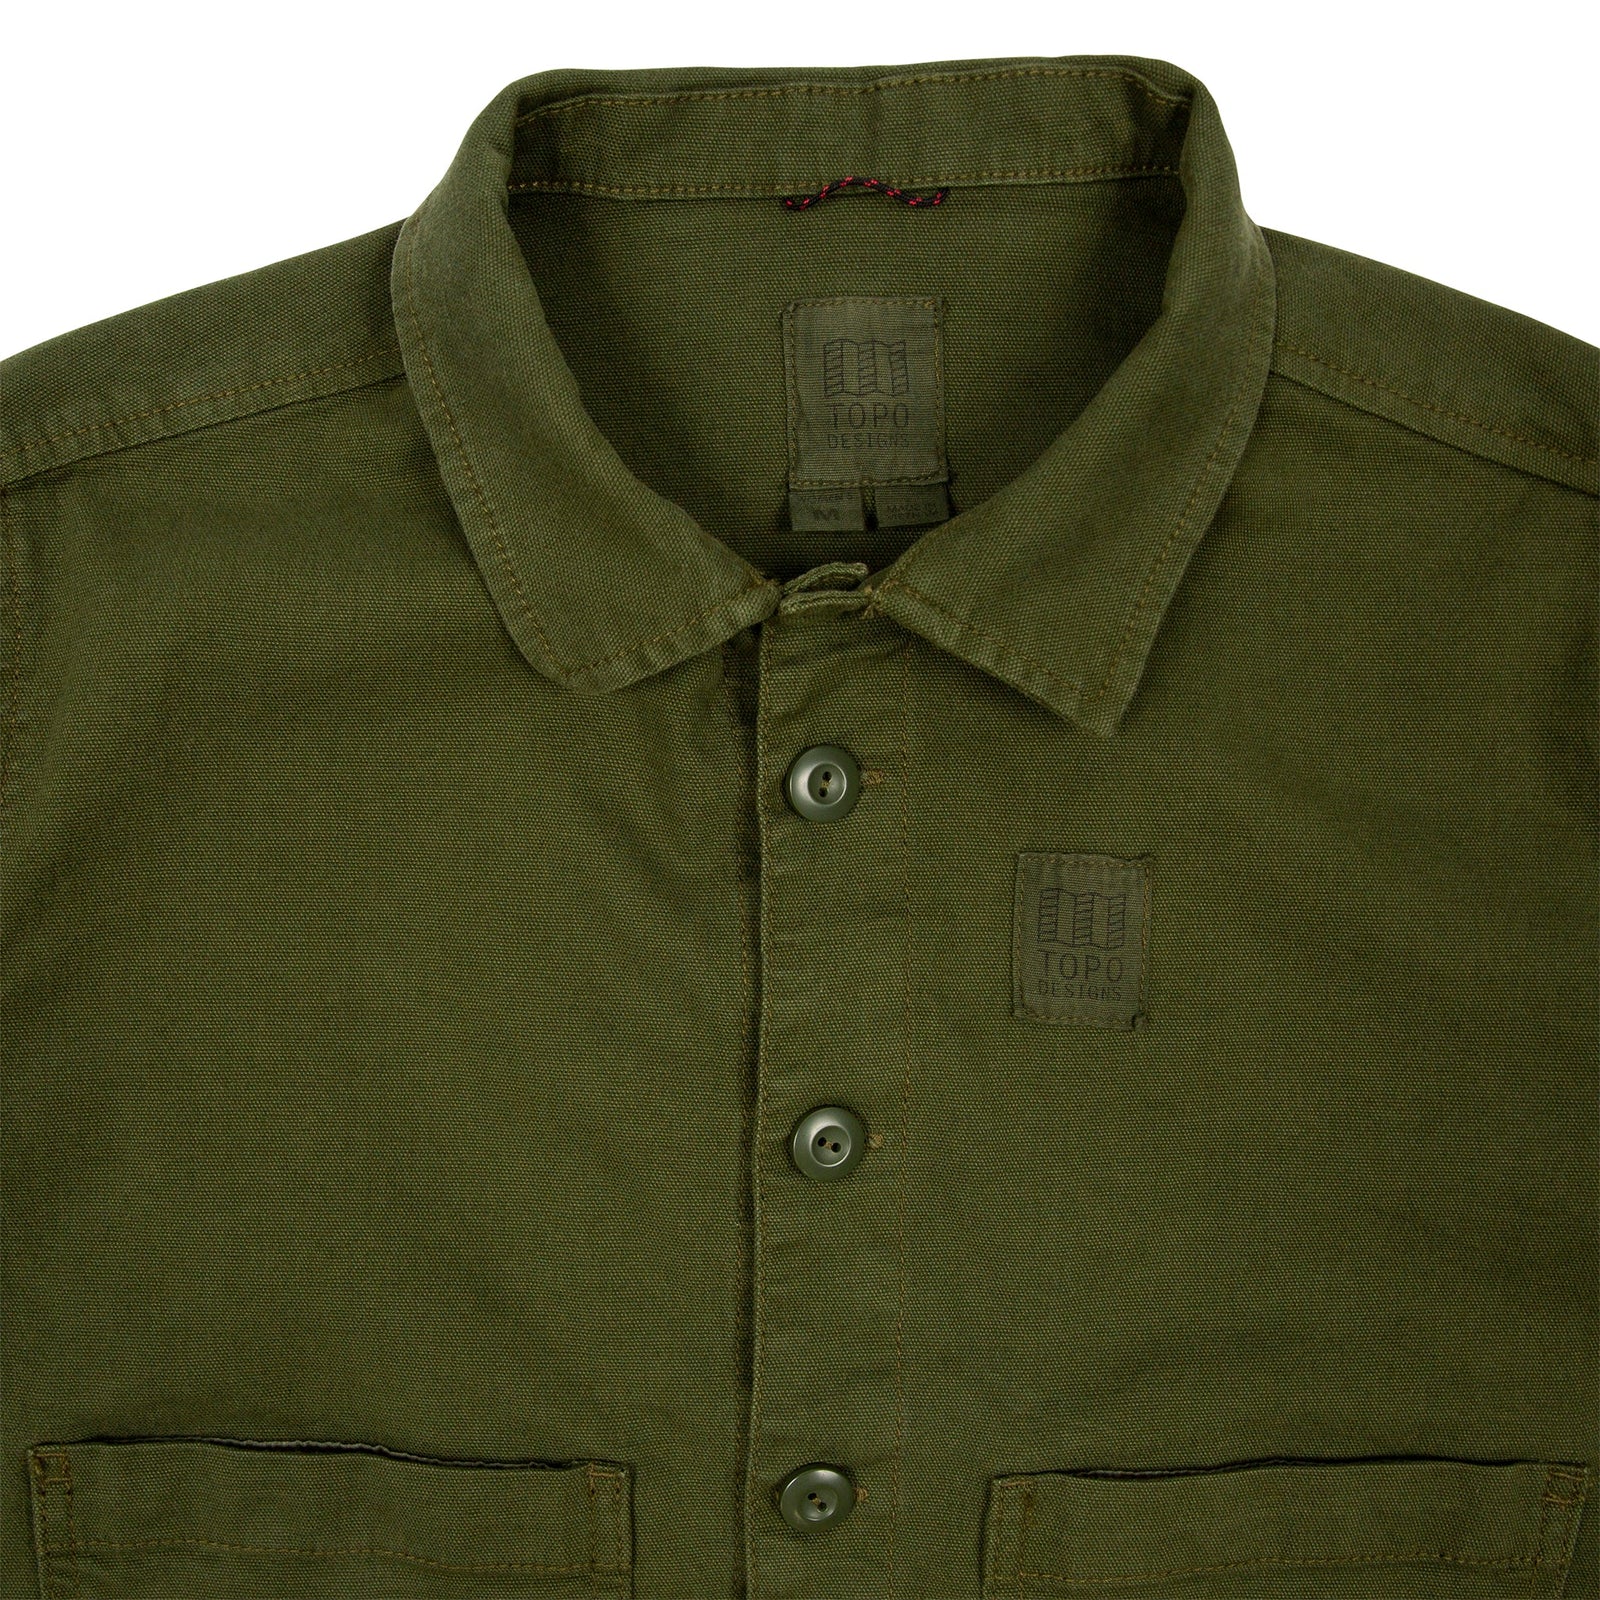 General detail shot of Topo Designs Women's Dirt Jacket in Olive green showing collar, inside tag, chest logo, and buttons.